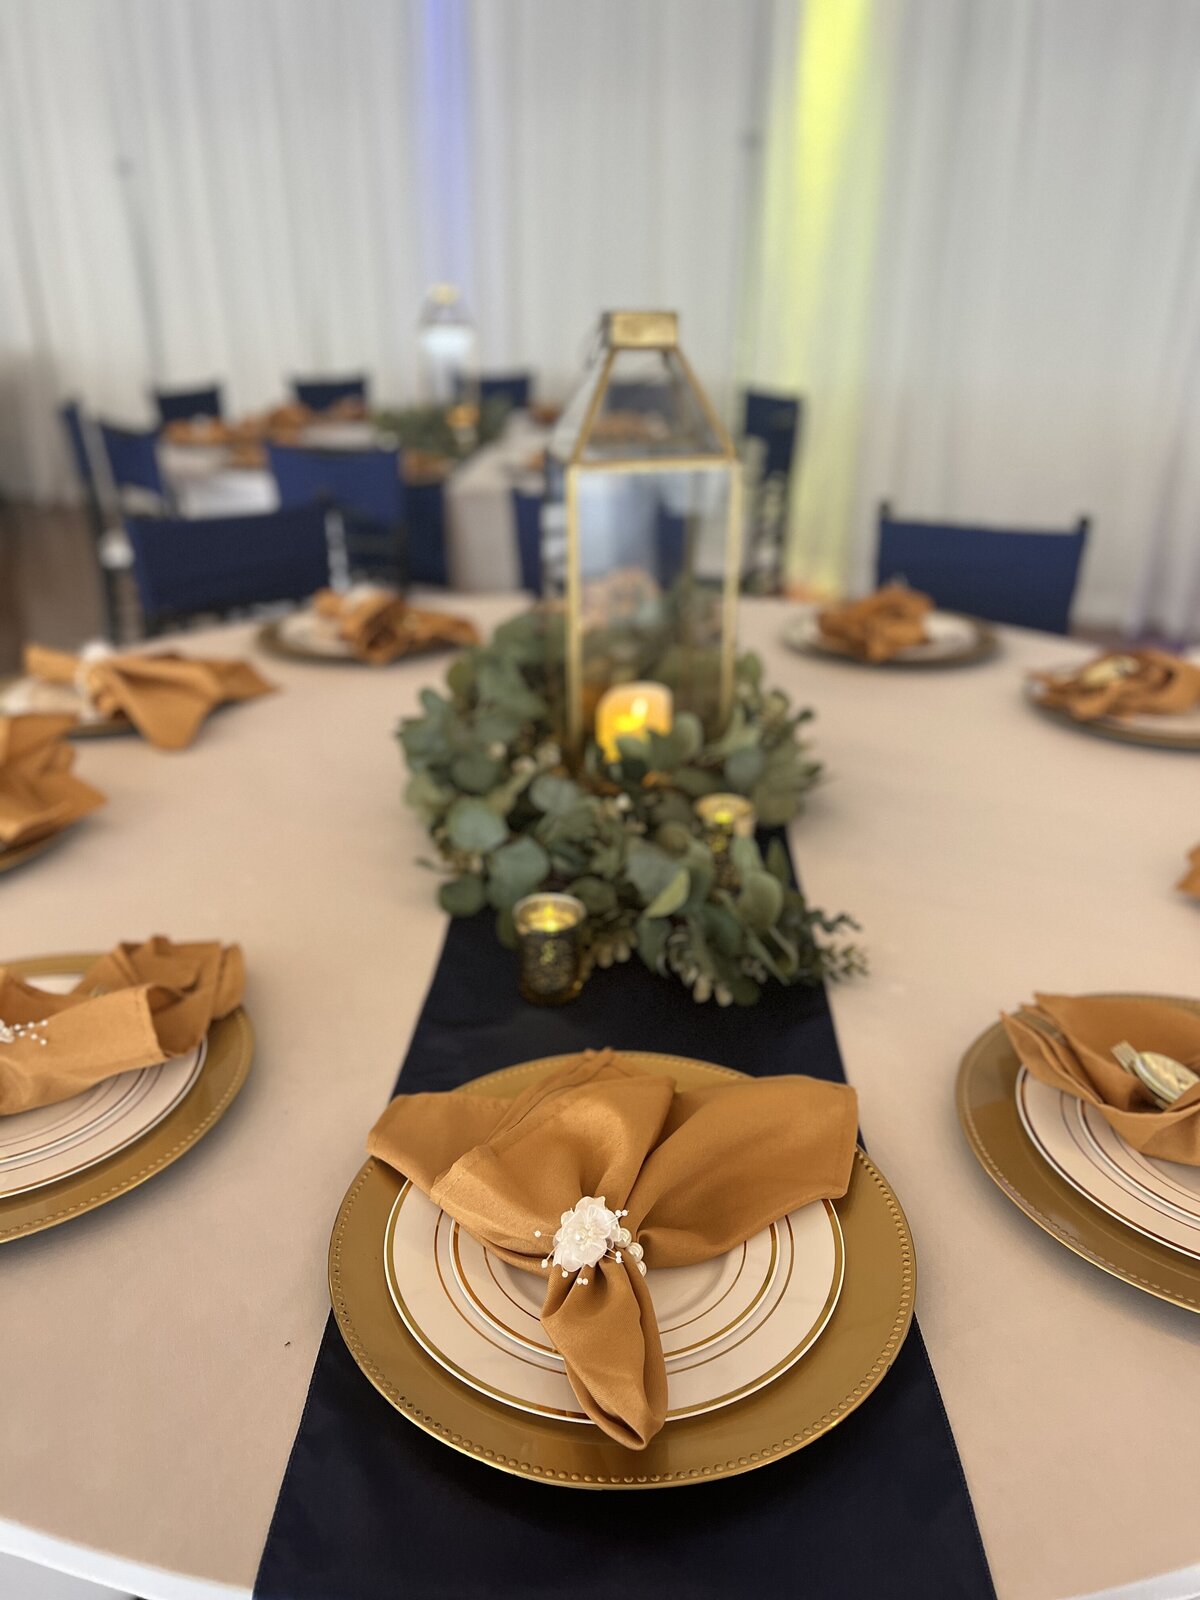 Birthday party guest table in our indoor banquet hall, The District, featuring our affordable classic decor package - Gold napkins, blue satin runners, and stunning gold lanterns create an elegant ambiance